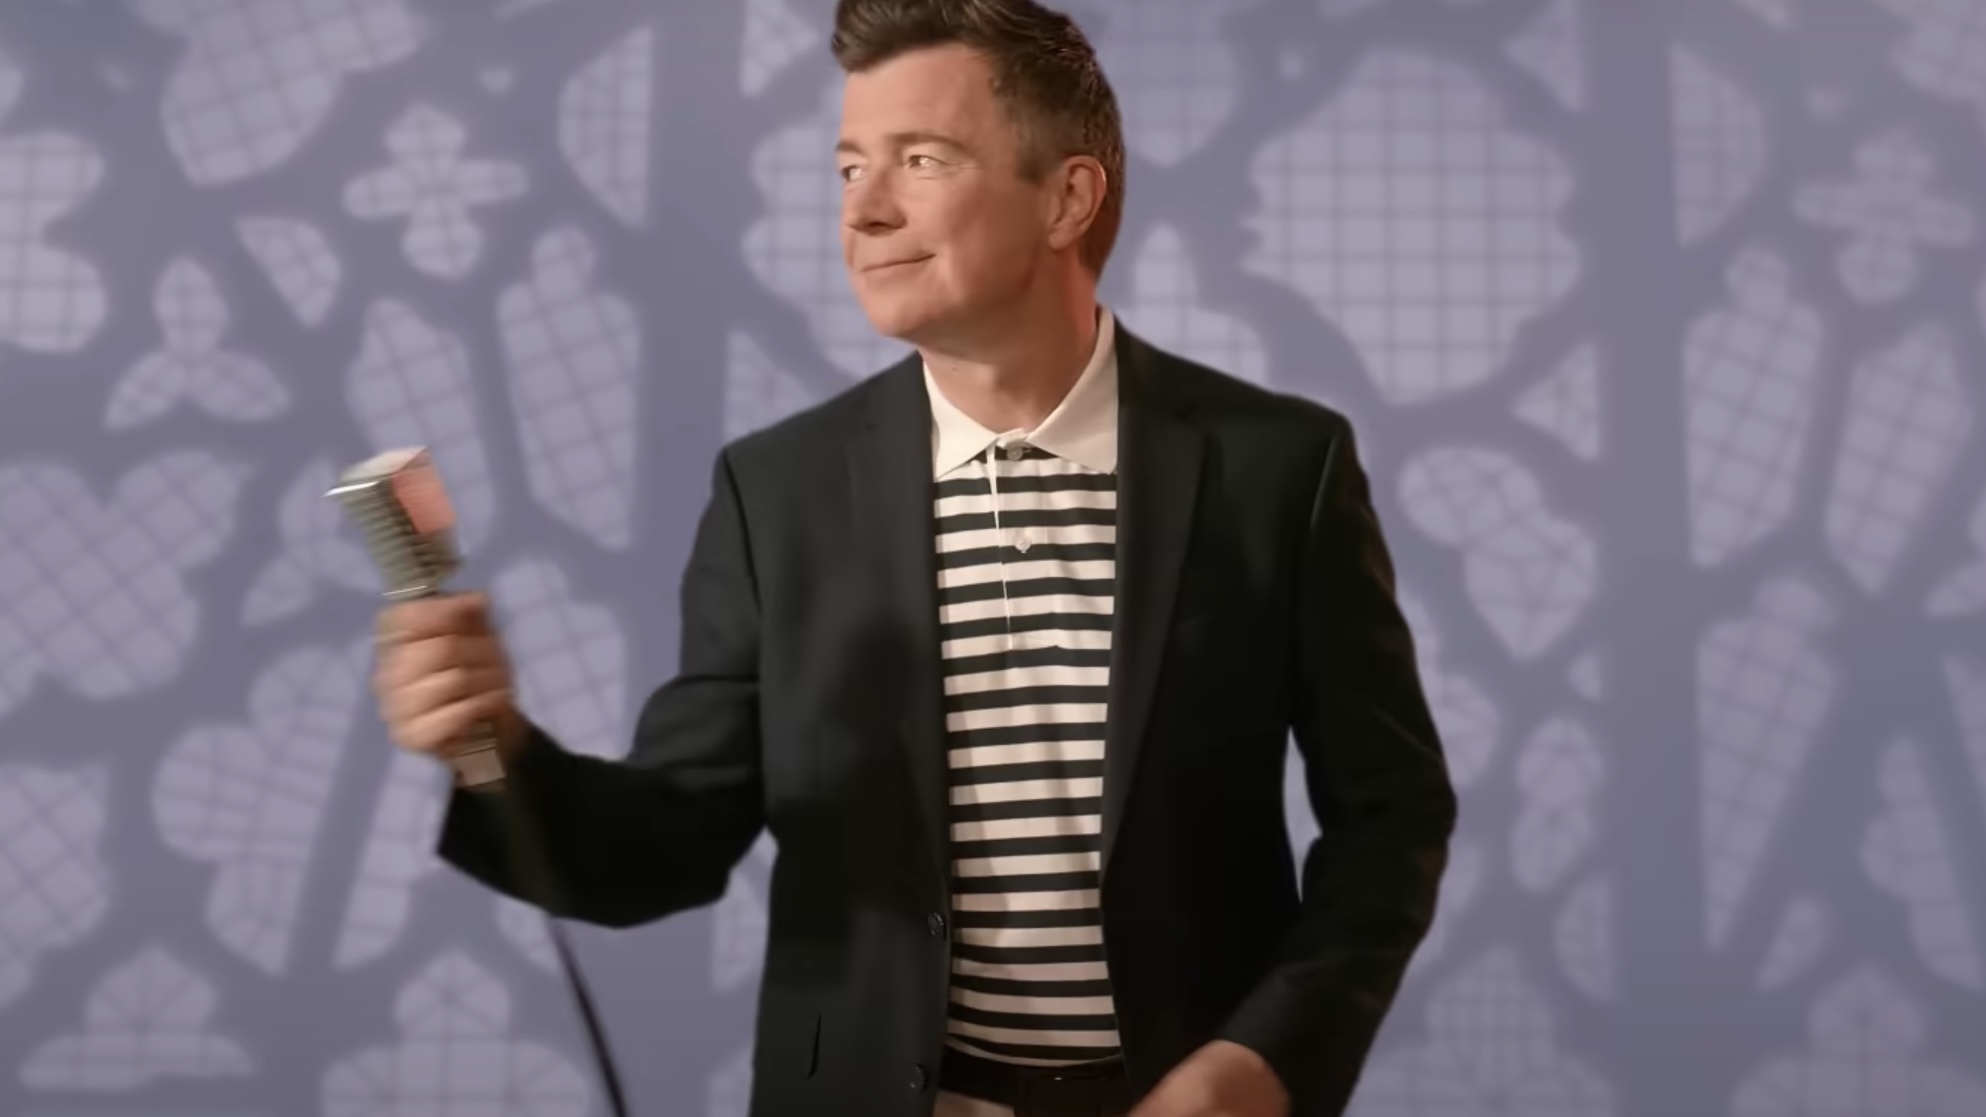 Rick Astley Recreates Iconic 'Never Gonna Give You Up' Music Video Amid  35Th Anniversary Celebrations - Retropop - Fashionably Nostalgic | News,  Interviews, Reviews, And More...